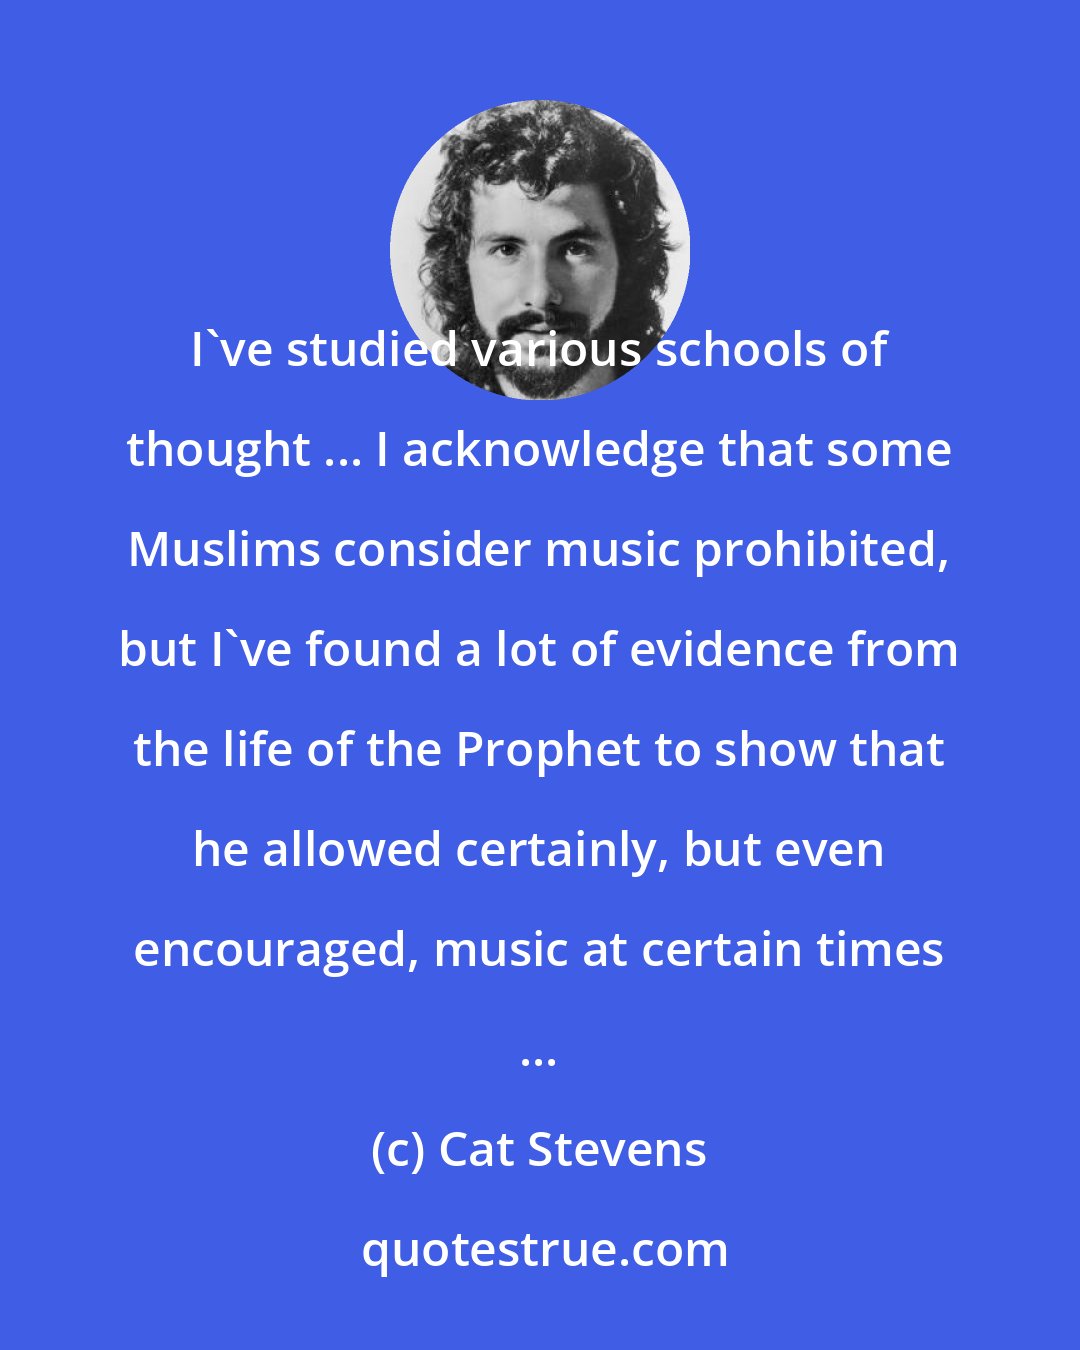 Cat Stevens: I've studied various schools of thought ... I acknowledge that some Muslims consider music prohibited, but I've found a lot of evidence from the life of the Prophet to show that he allowed certainly, but even encouraged, music at certain times ...